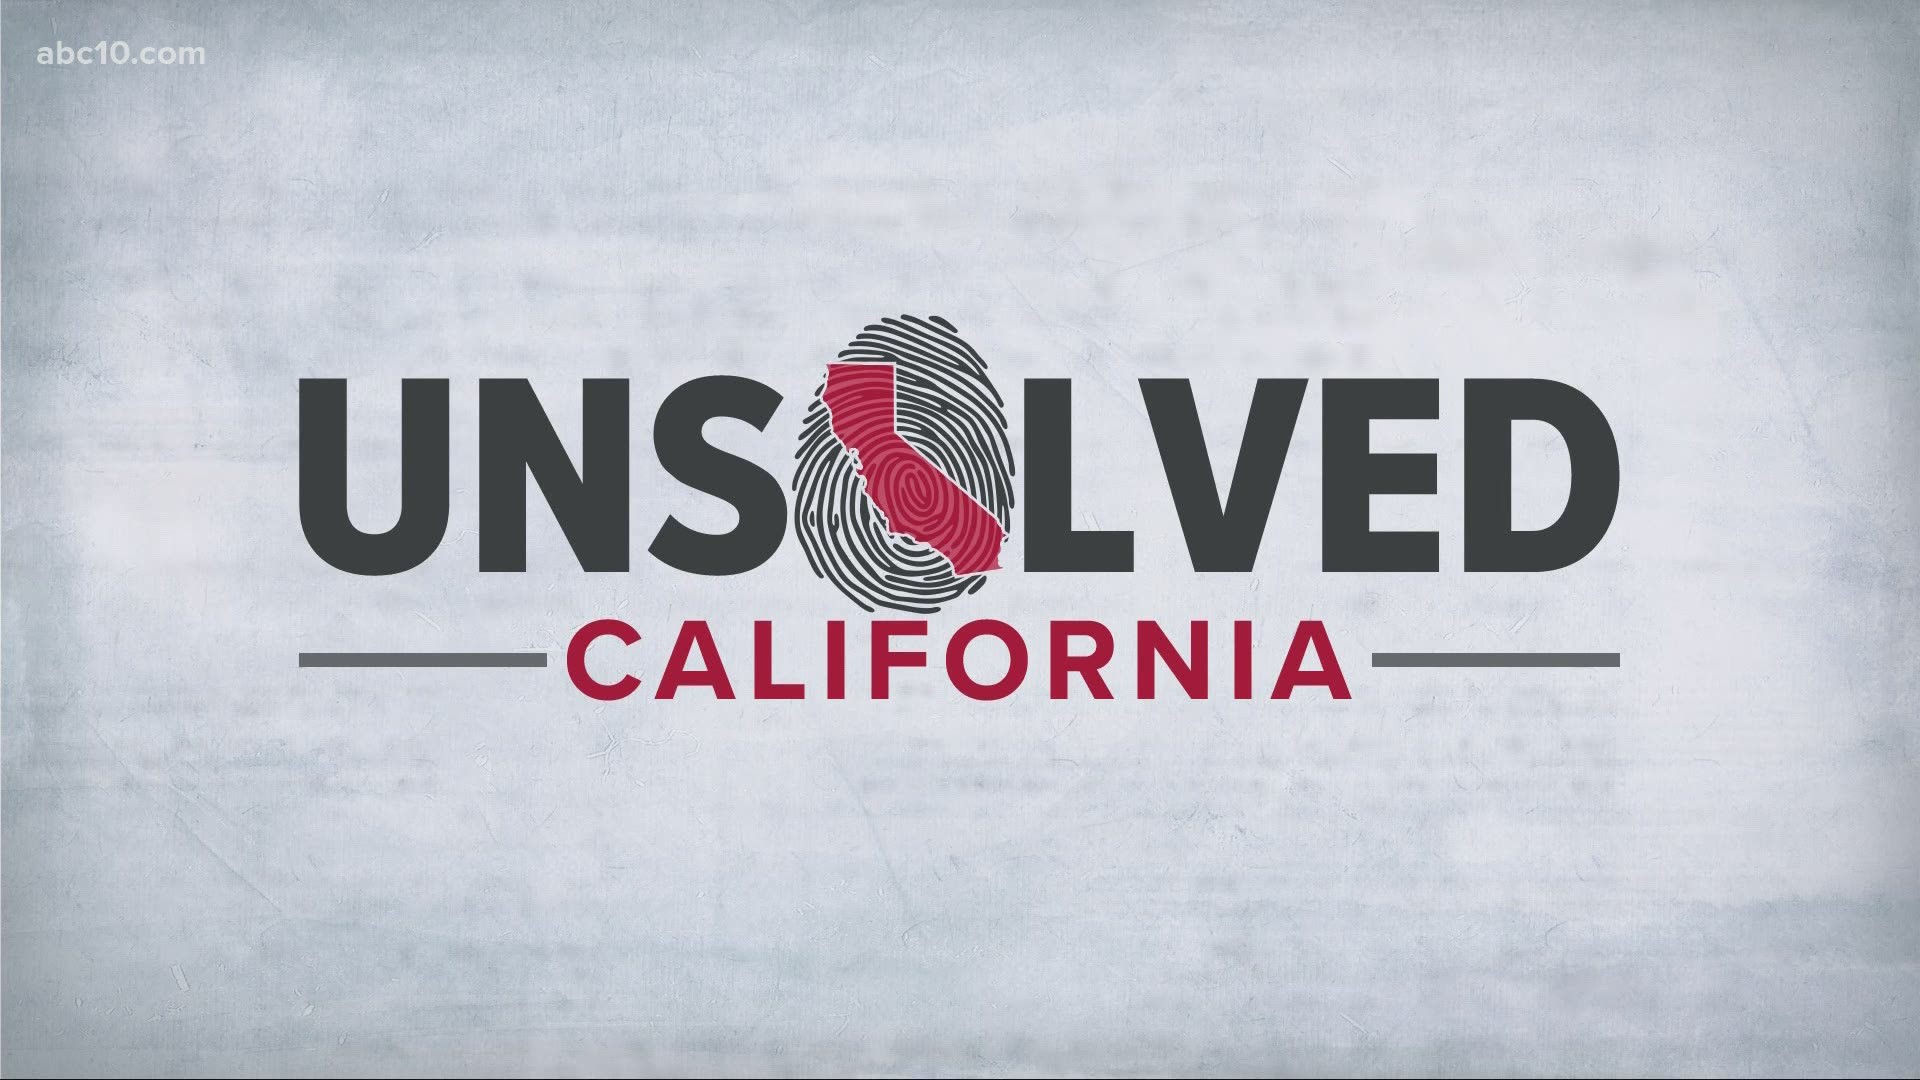 Madison brings you another edition of "Unsolved California," where she discusses the discovery of the remains of a man who'd been missing since 2018.